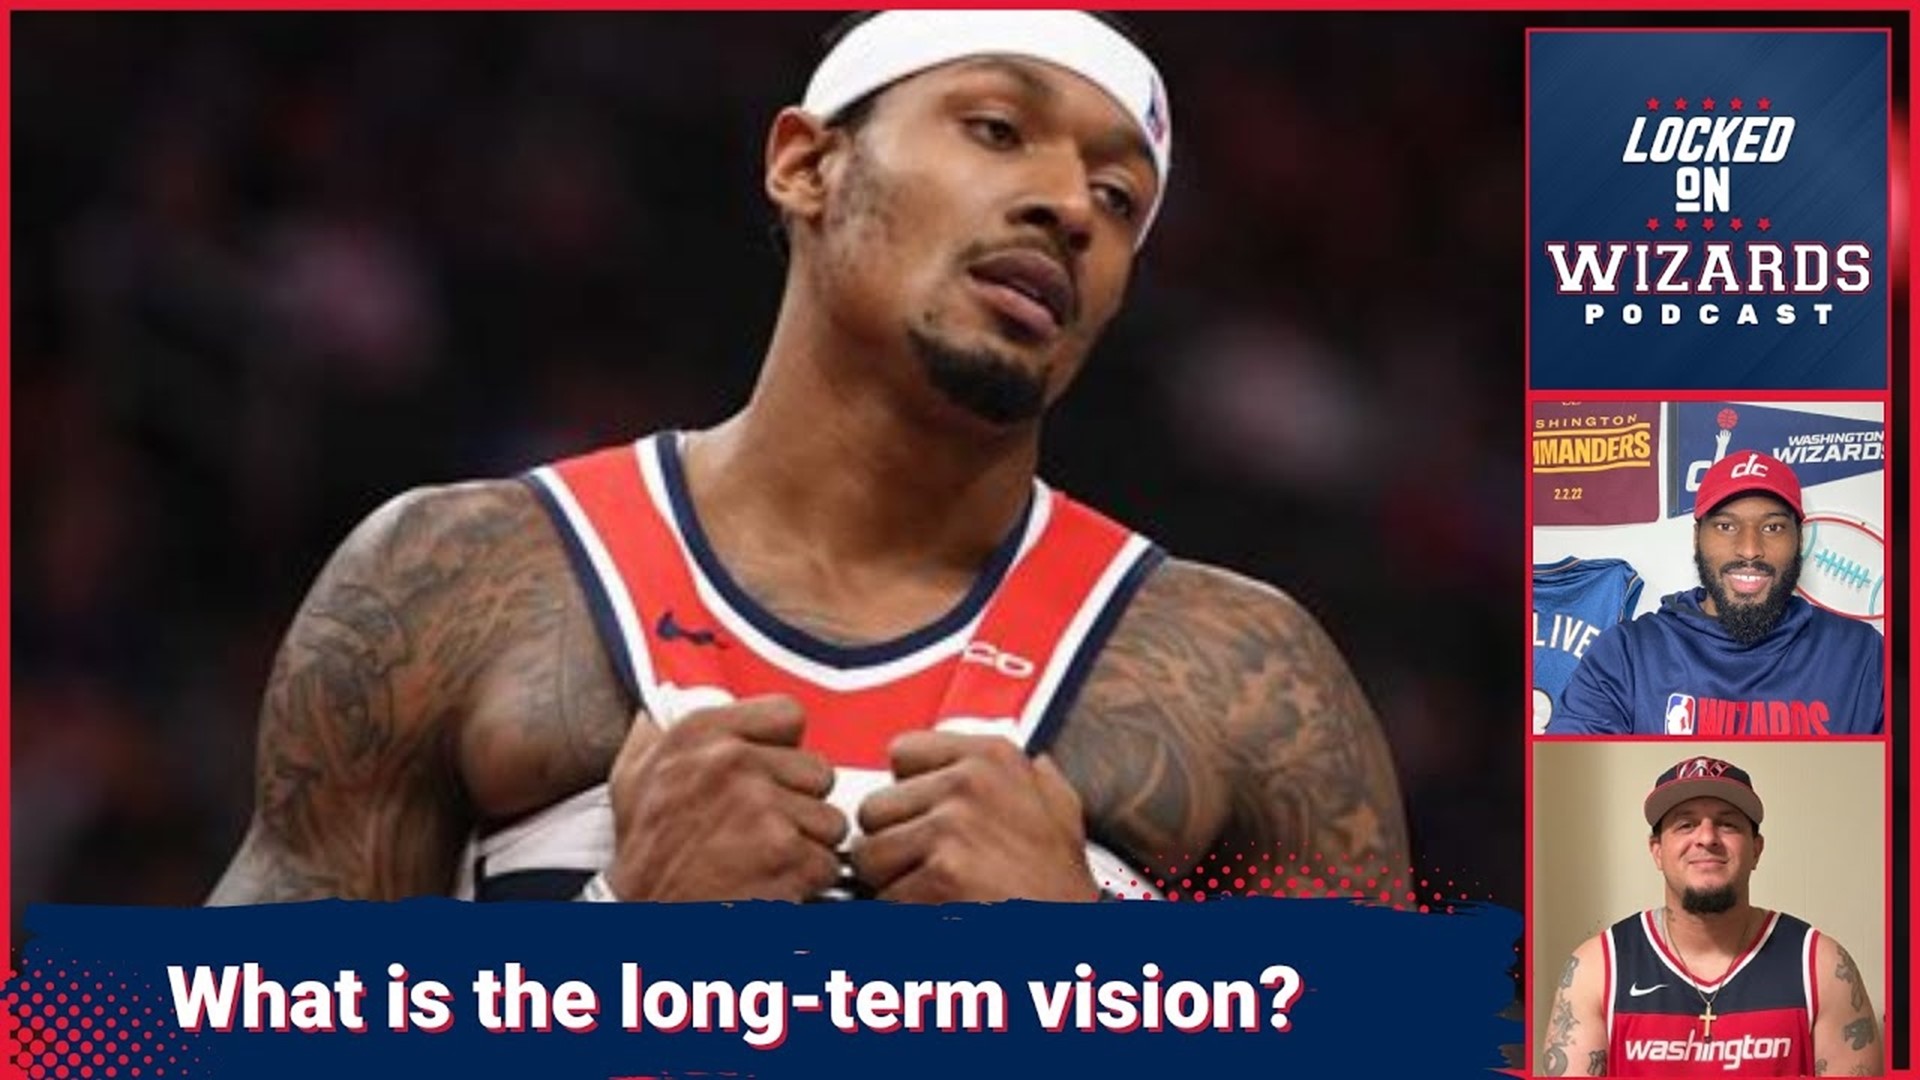 Brandon asks three important questions about the long-term vision of the Washington Wizards. Is the foundation of Beal, Kuzma, and Porzingis enough?